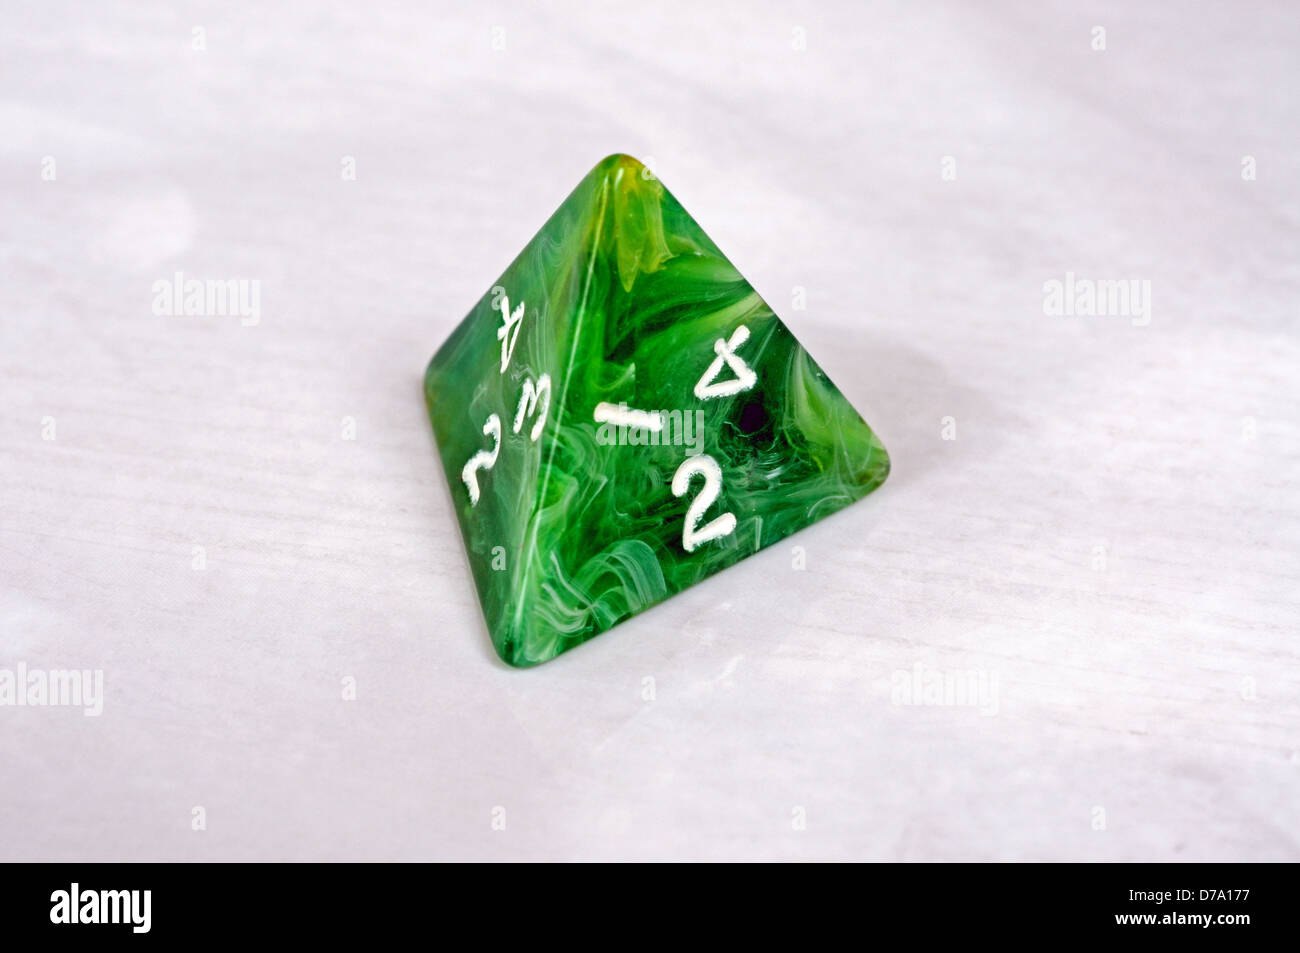 Platonic 4 sided pyramic die against a white background. Stock Photo